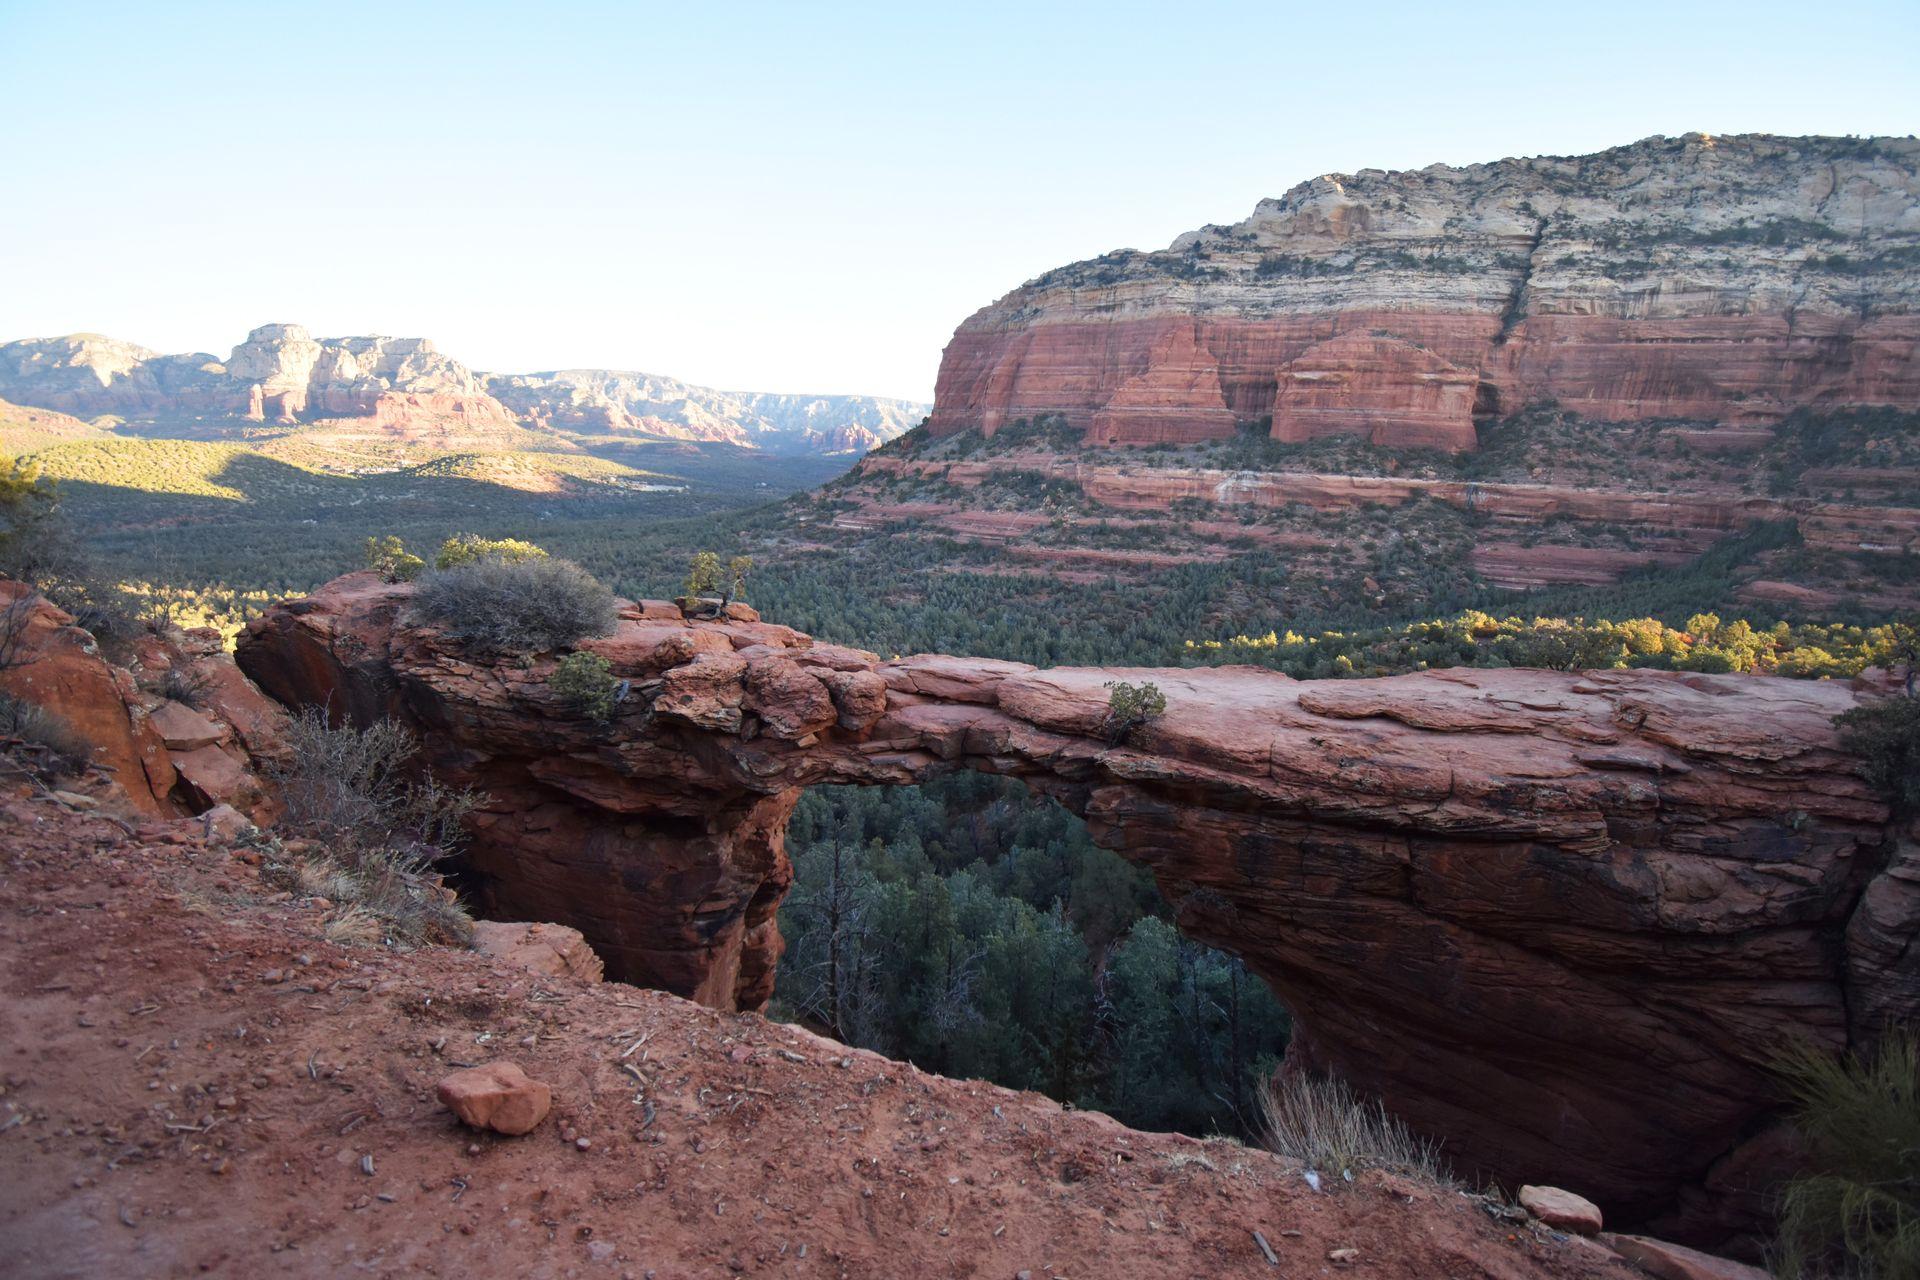 Looking out at Devil's Bridge, a giant red rock bridge. There is a mesa in the background.